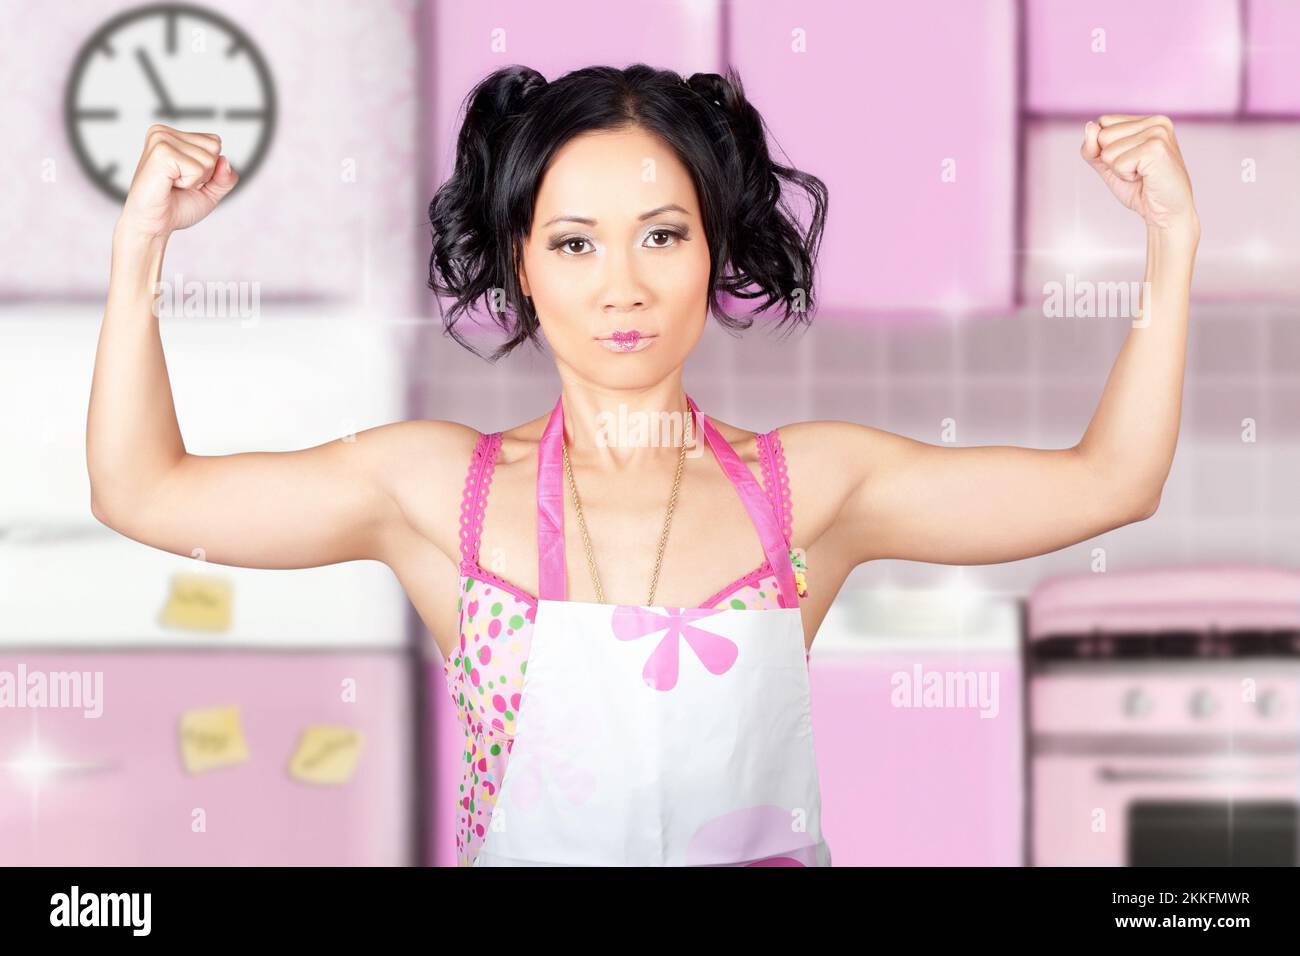 Funny cleaning pinup woman wearing apron flexing muscles in home kitchen when showing the power of clean Stock Photo